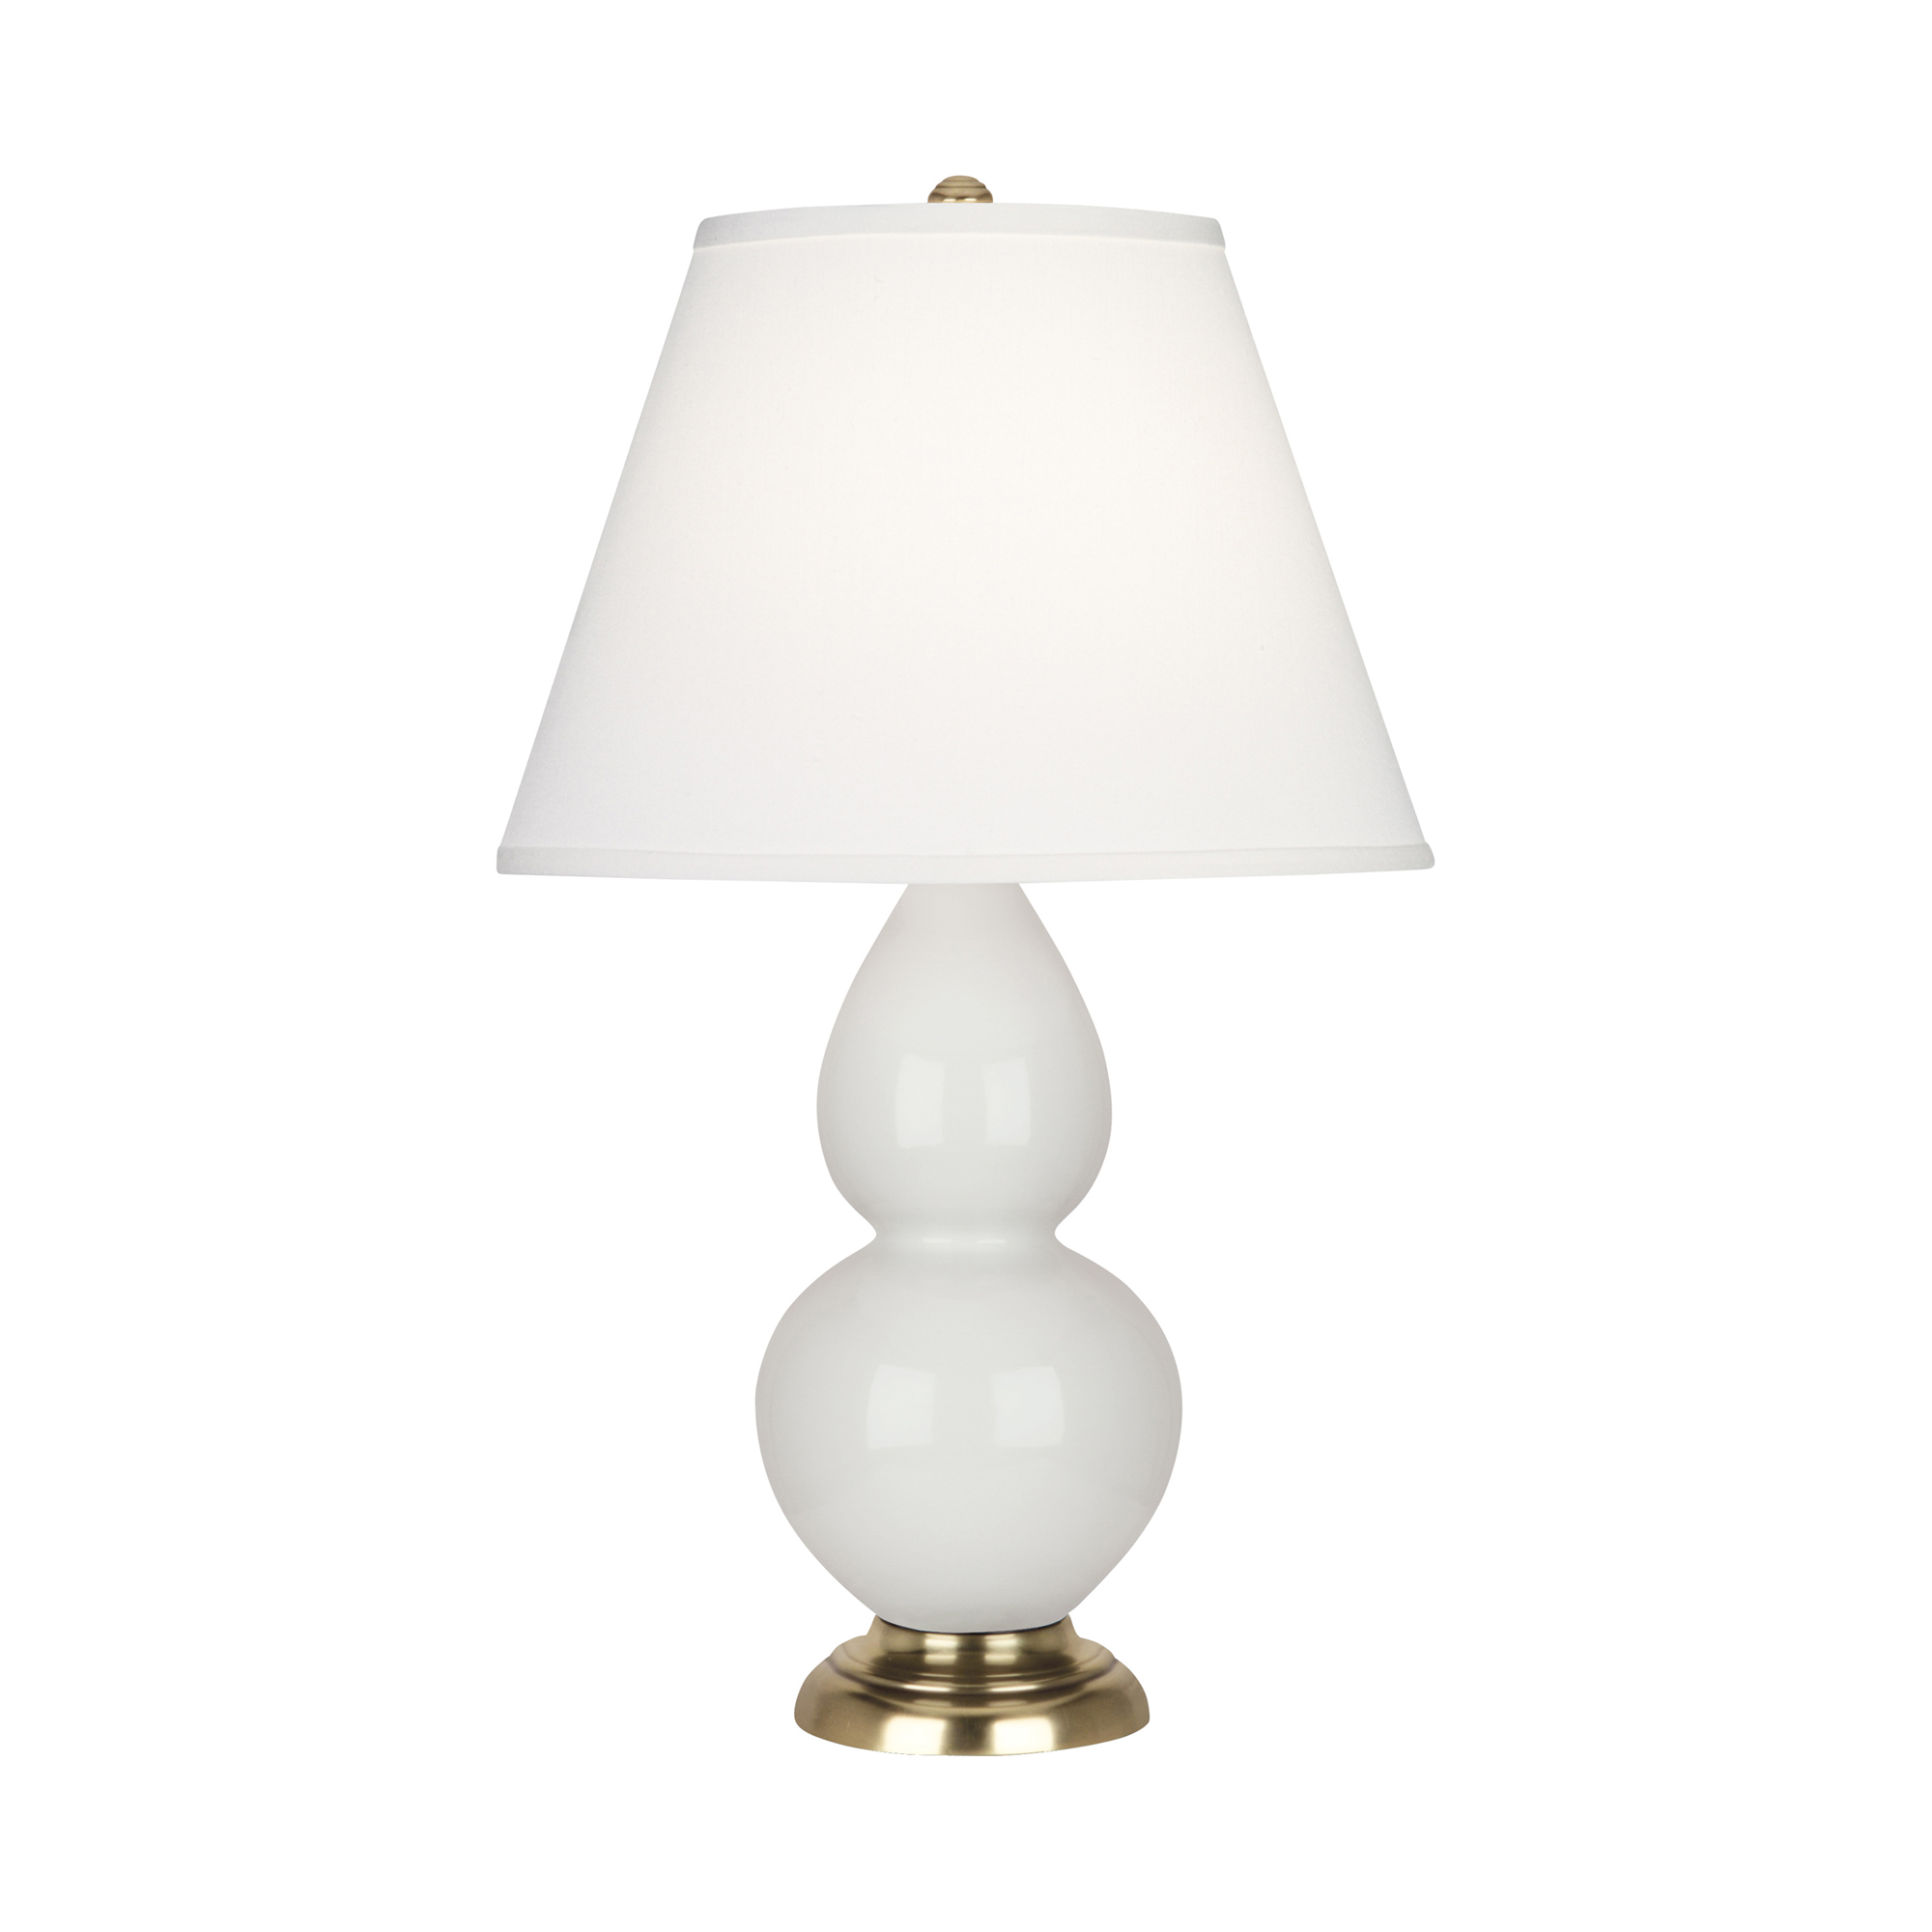 Small Double Gourd Accent Lamp Style #1680X